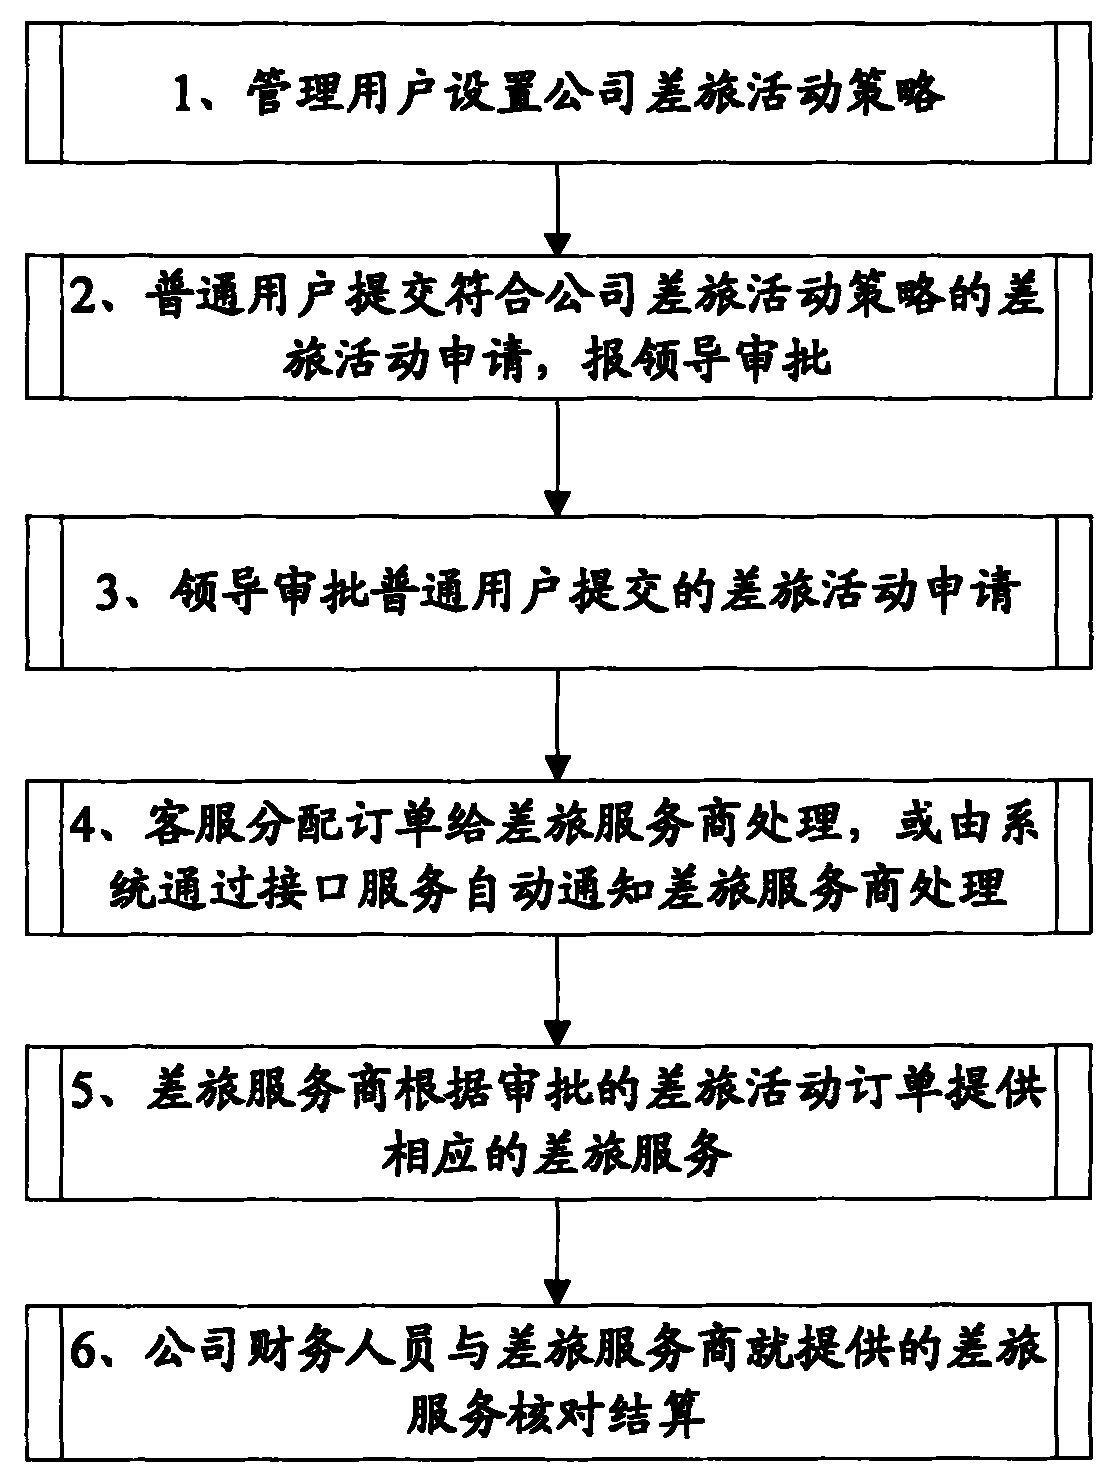 One-stop travel activity management method and system